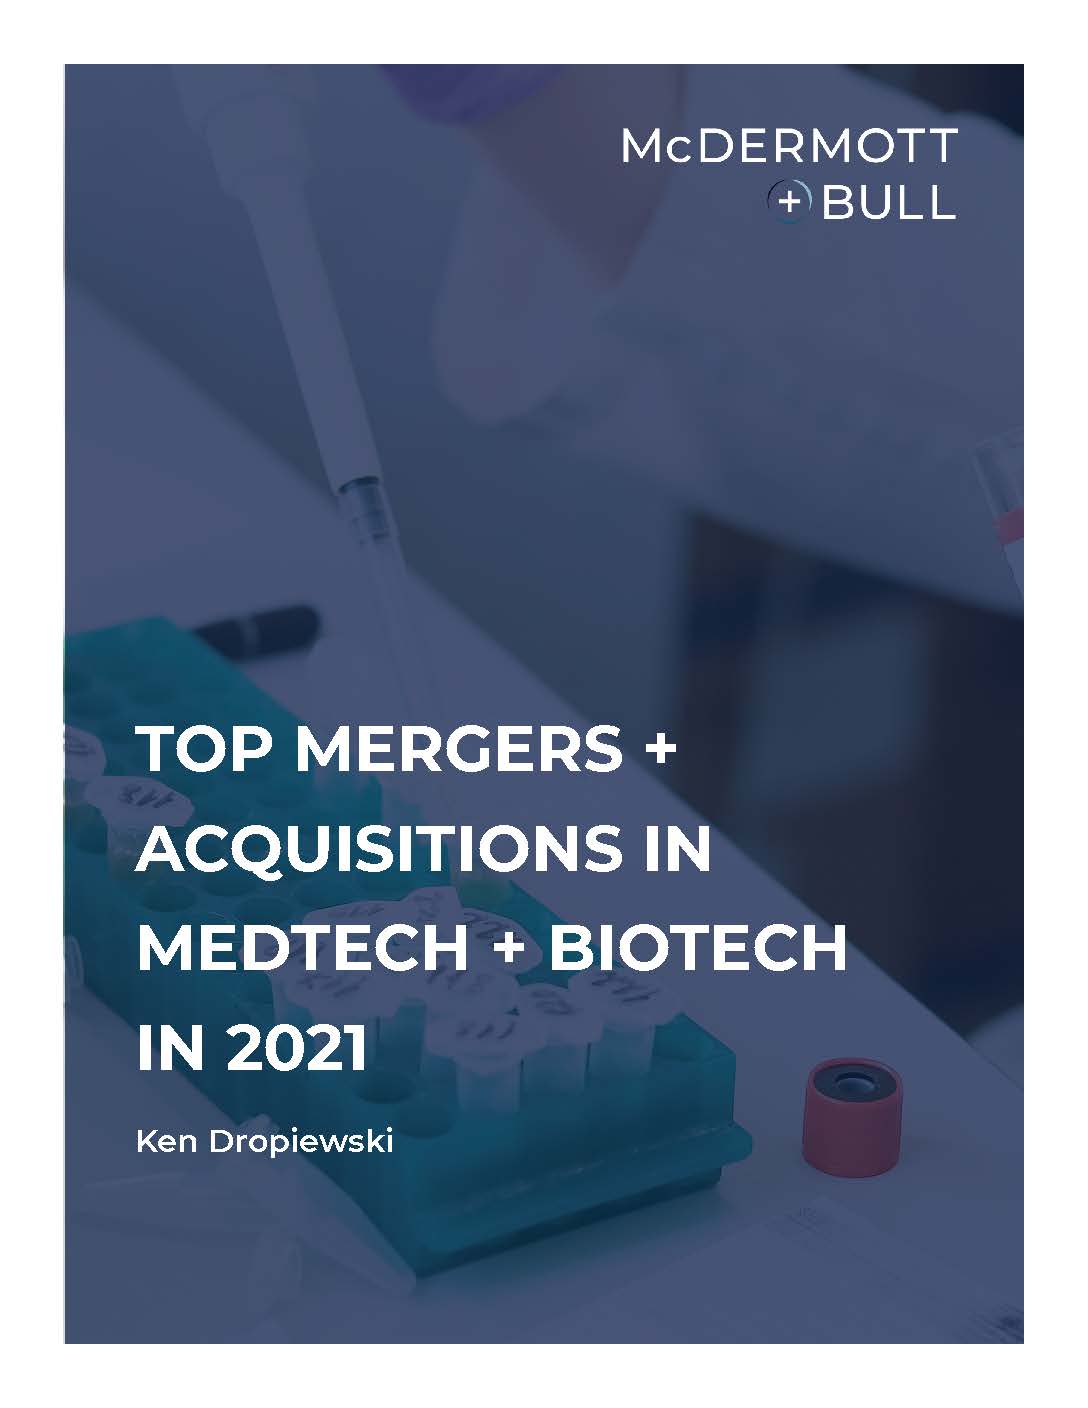 Top Mergers and Acquisitions in MedTech and Biotech in 2021